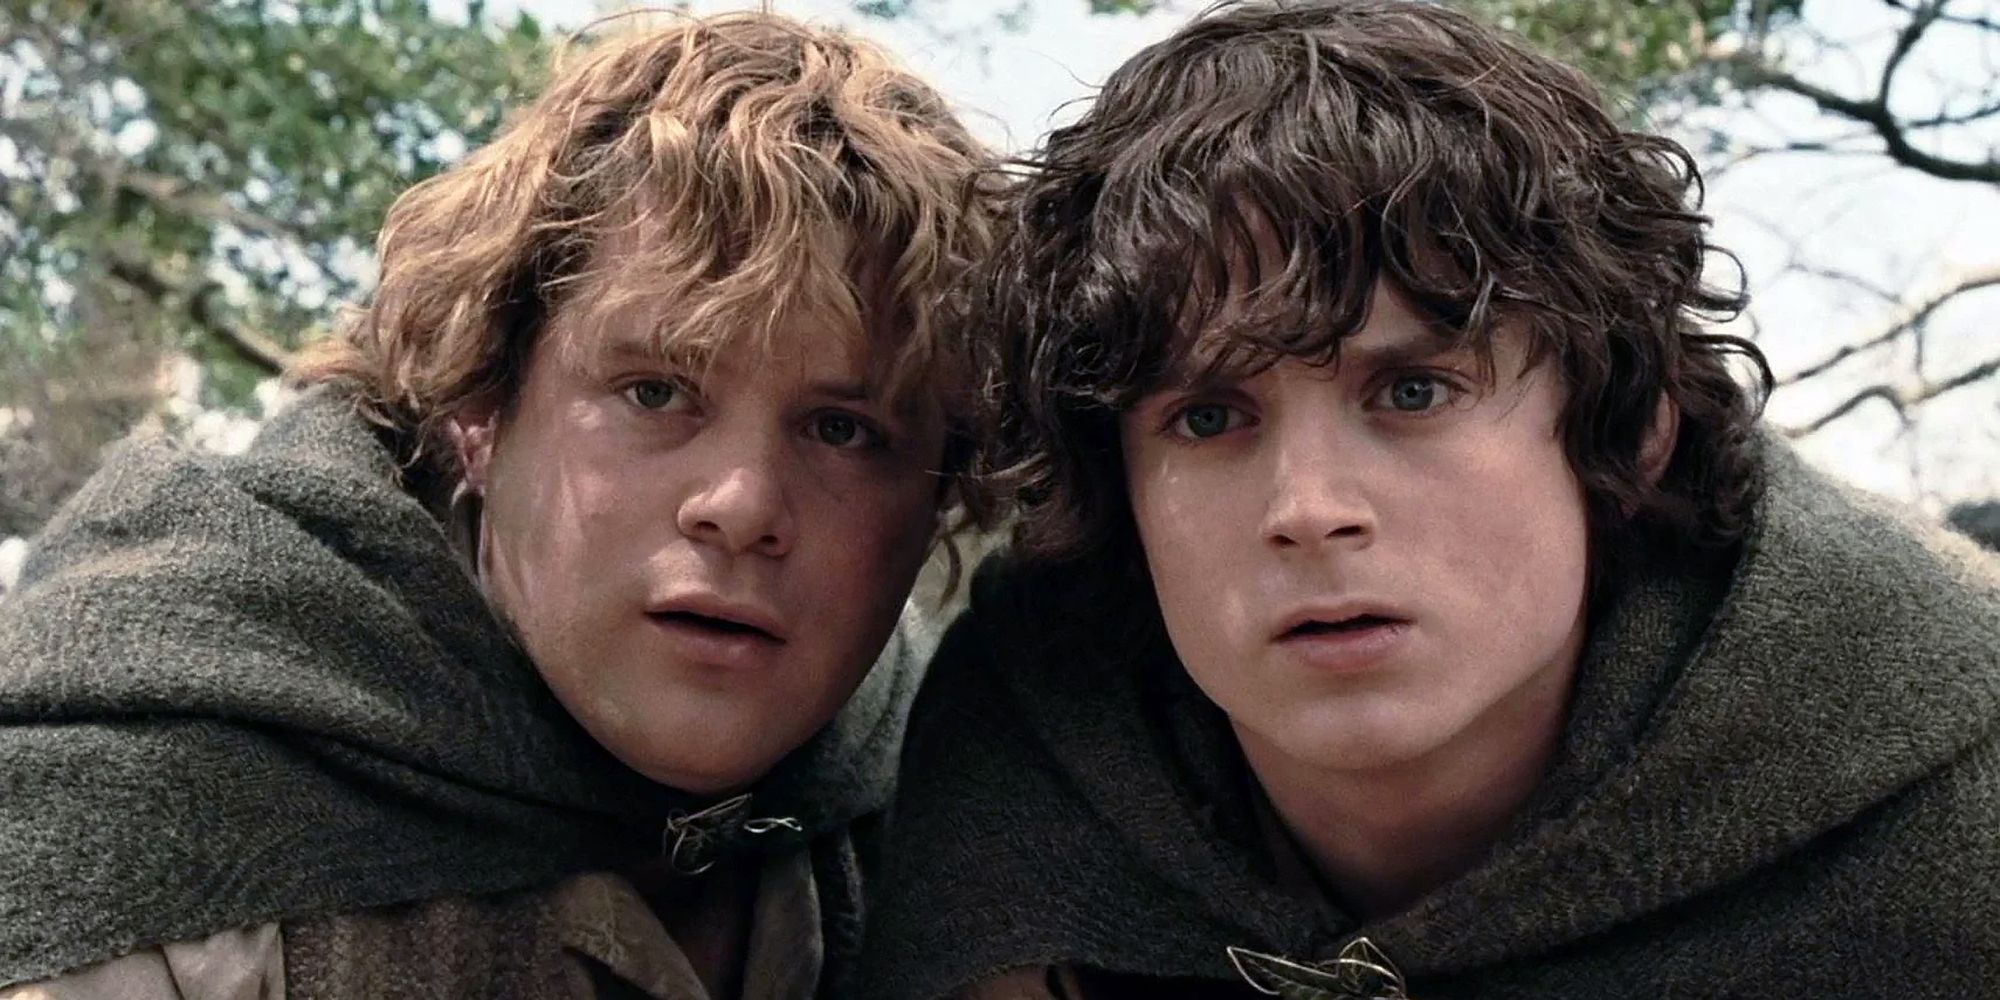 Samwise Gamgee (Sean Astin) with Frodo Baggins (Elijah Wood) in 'The Lord of the Rings' trilogy